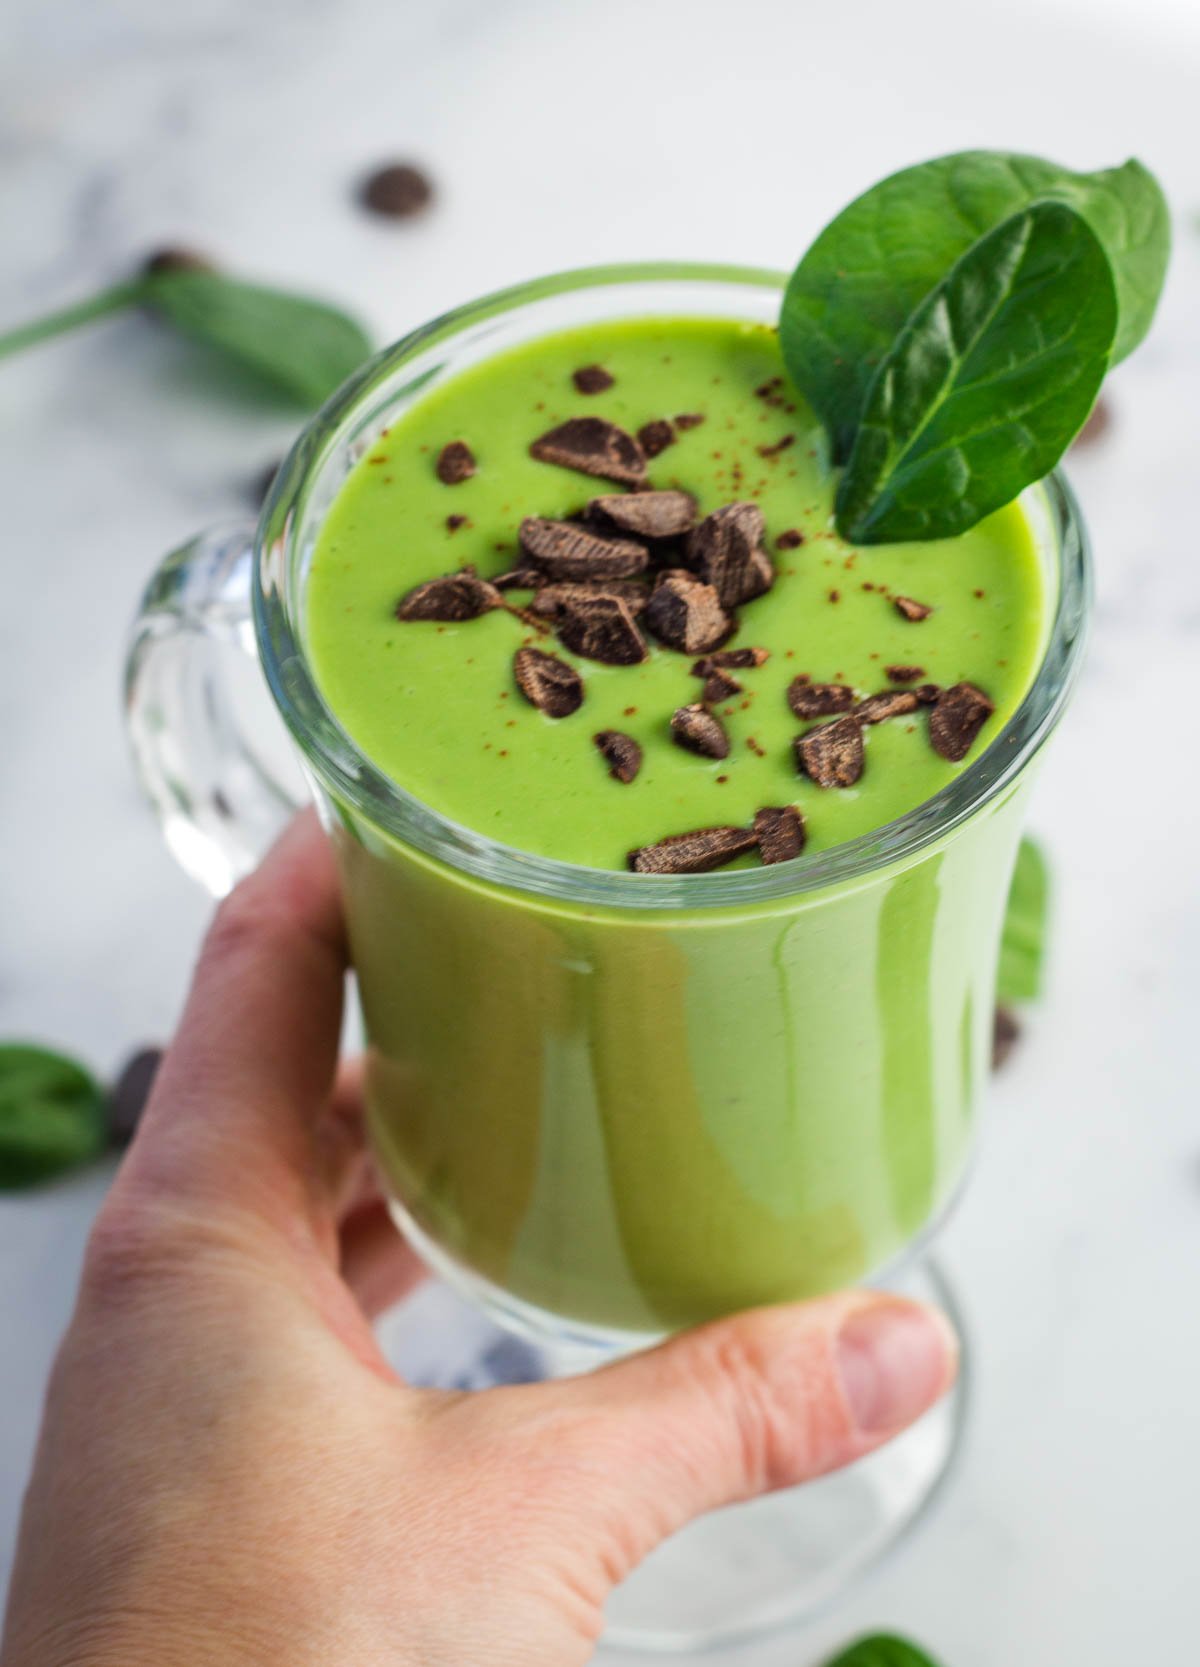 hand picking up glass of green shake topped with chocolate chips and spinach leaves